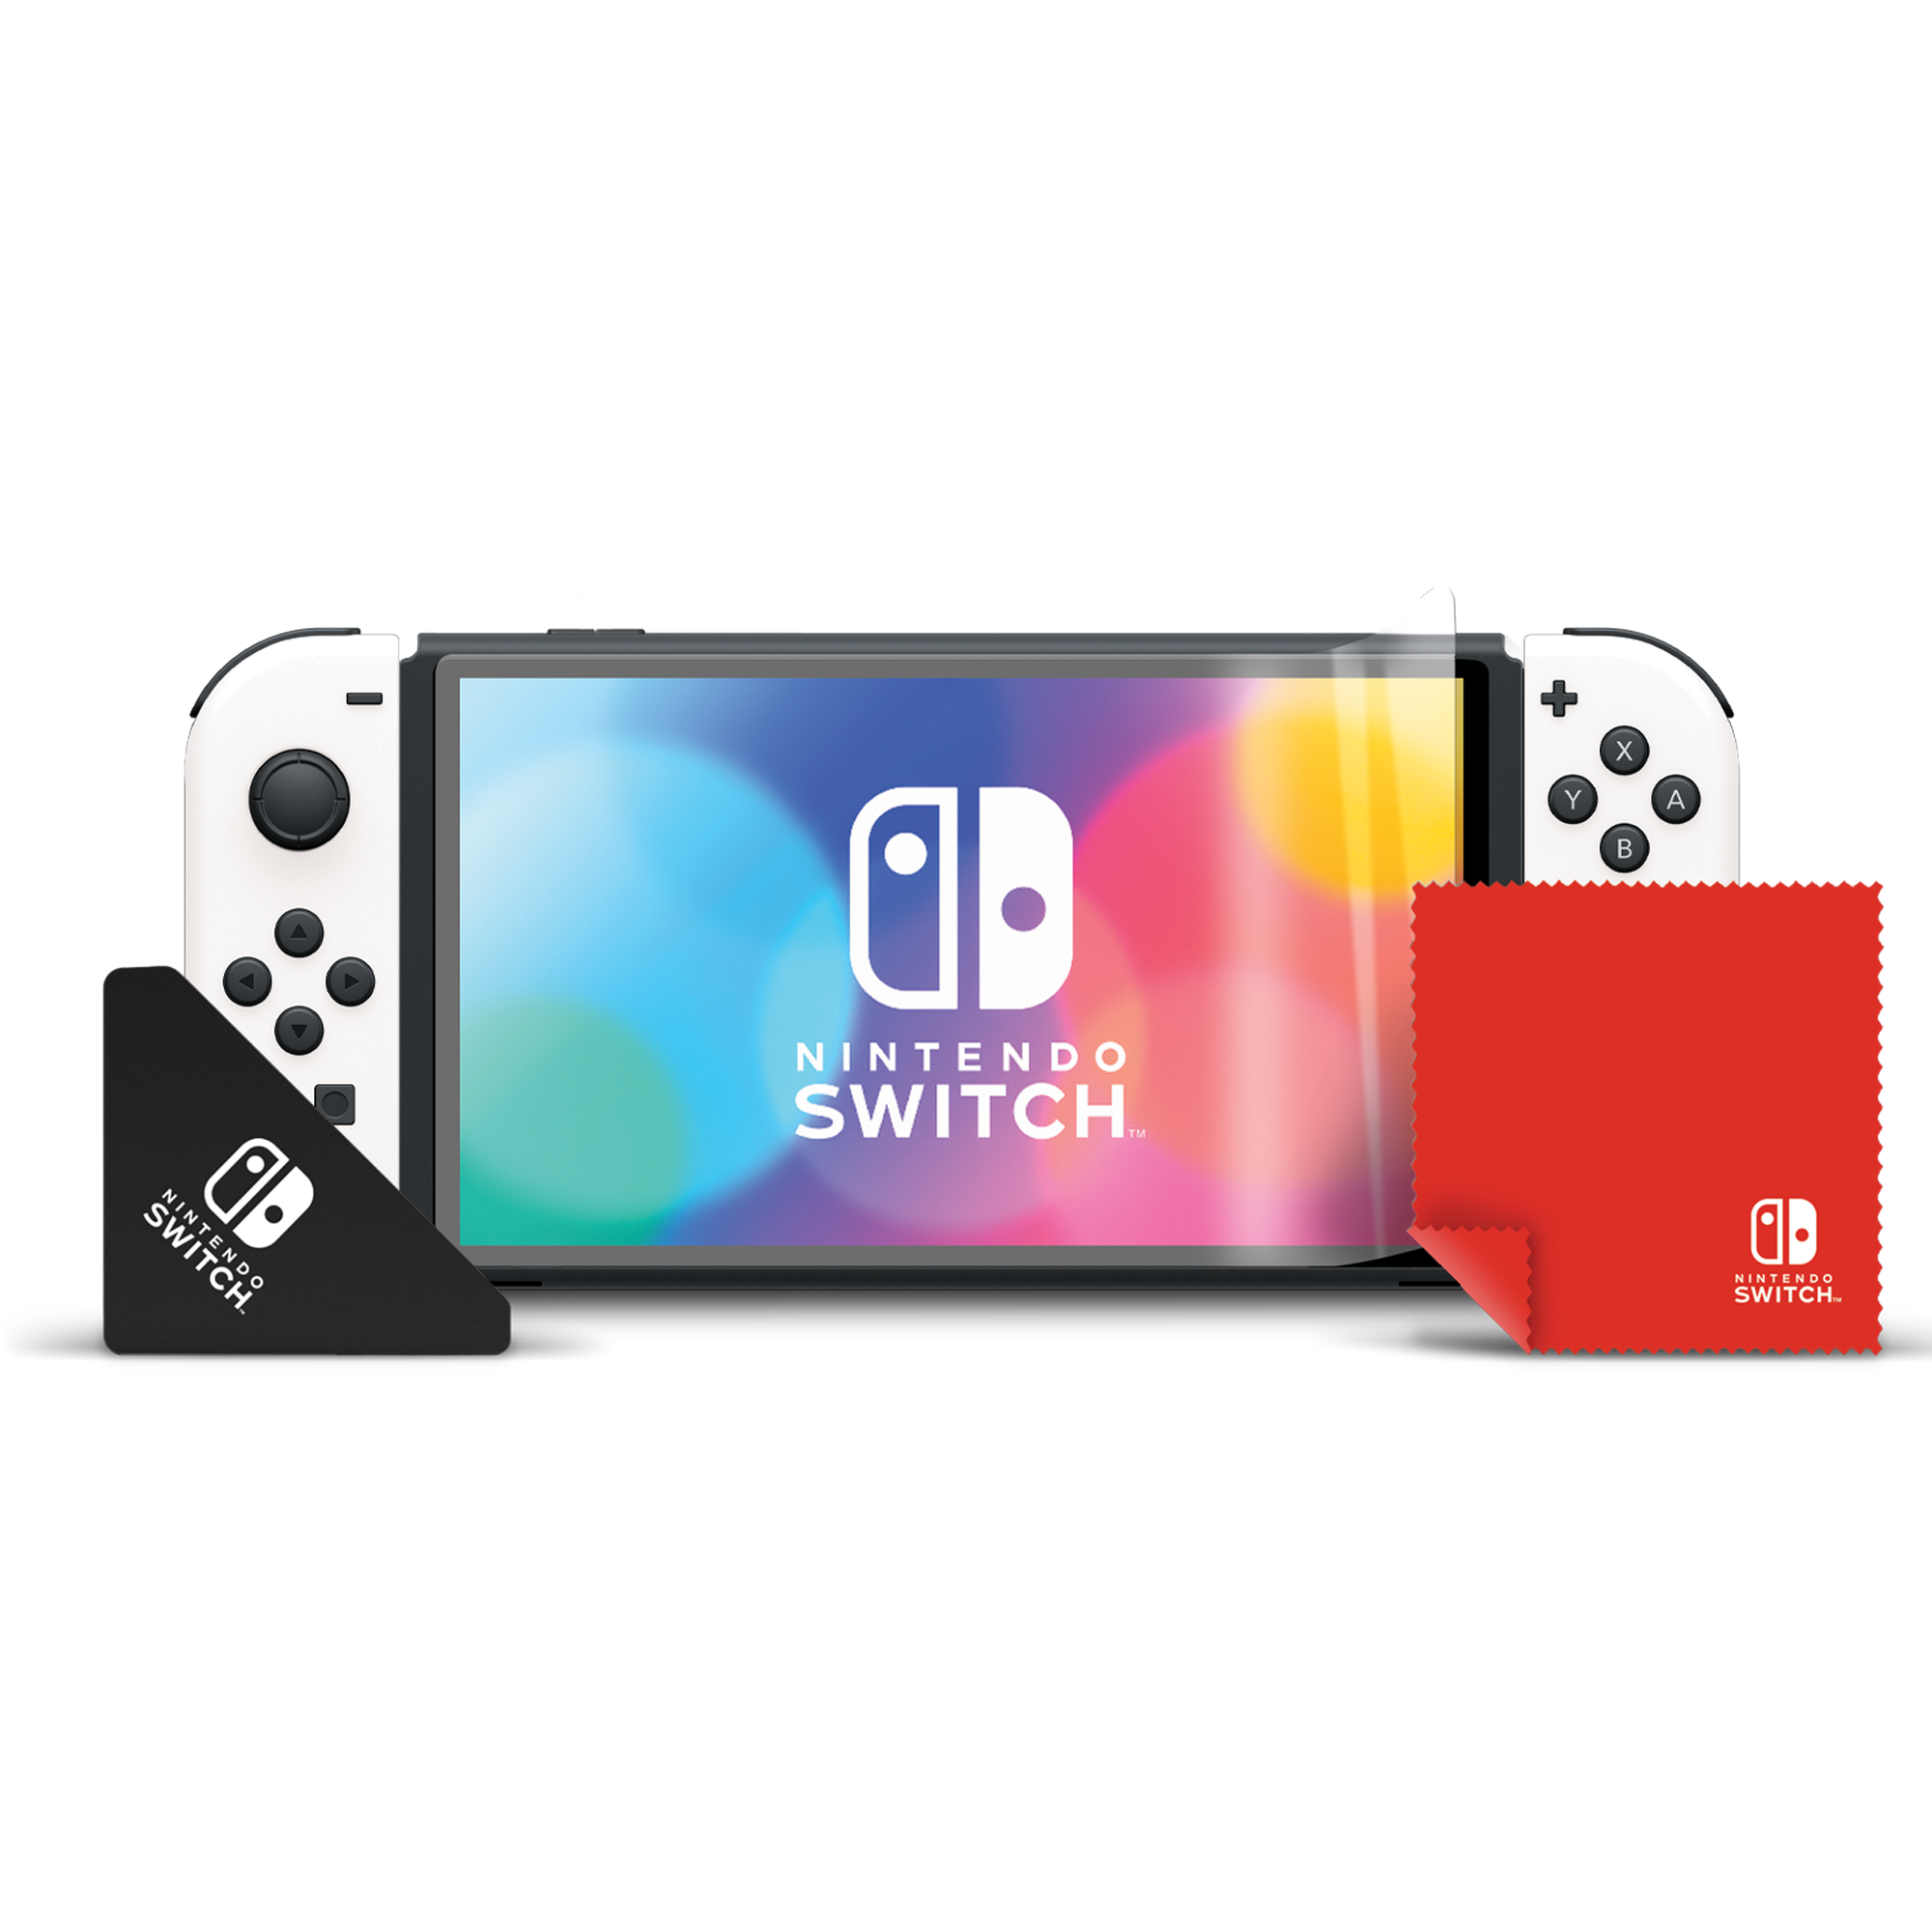 Multi Screen Protector Kit for Nintendo Switch / Nintendo Switch OLED Model  for Nintendo Switch